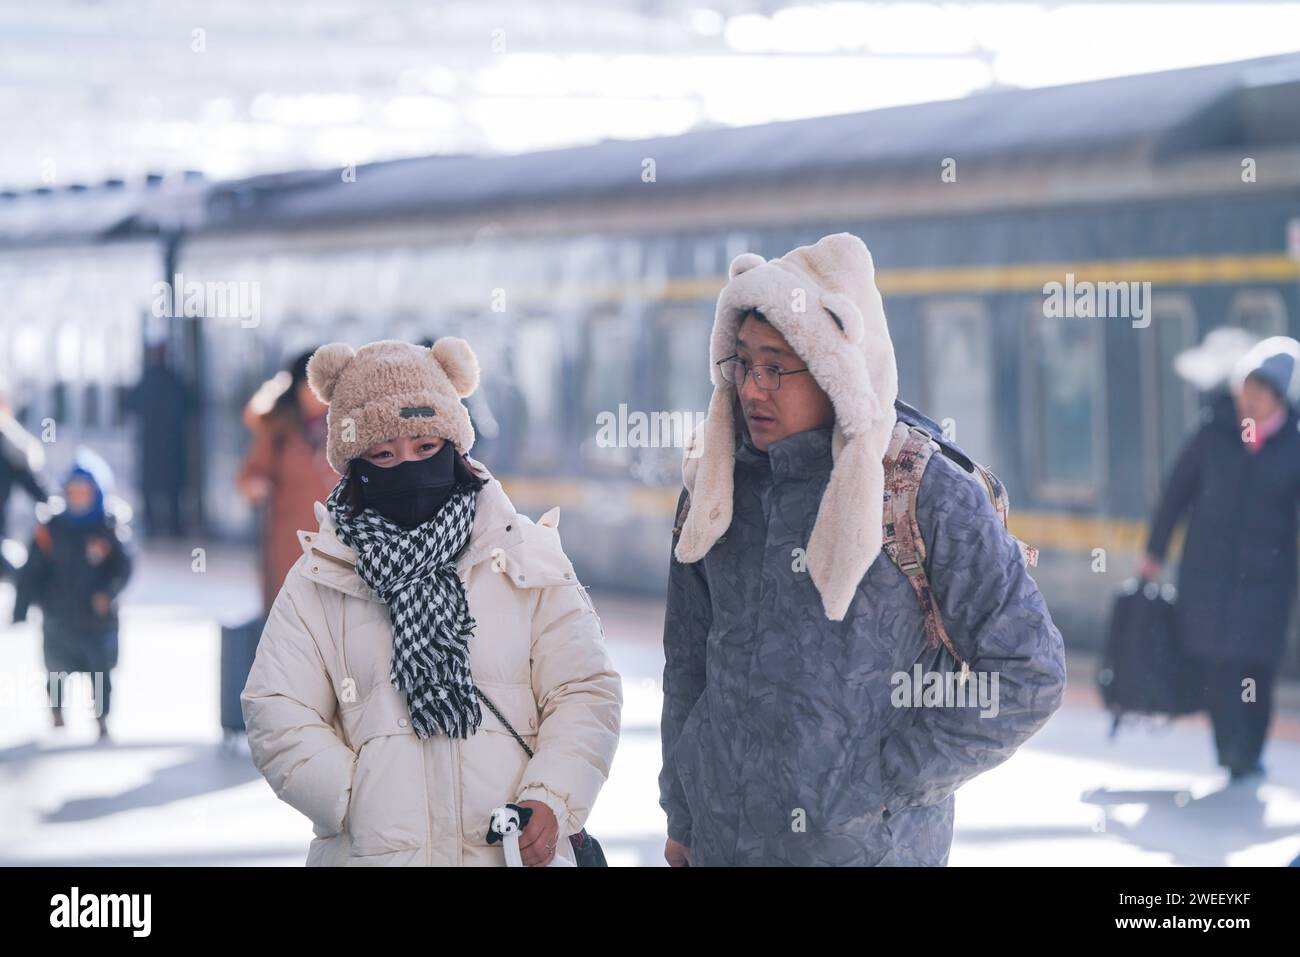 (240125) -- HARBIN, Jan. 25, 2024 (Xinhua) -- Passengers get off the train K7065 from Harbin to Fuyuan after arriving in Fuyuan, northeast China's Heilongjiang Province, Jan. 23, 2024. The train K7065/K7066 travels to and fro between the city of Harbin and Fuyuan in China's northeastern province of Heilongjiang. With a single journey time of nearly 15 hours, the train replaced old carriages with new ones having air conditioning system, offering a better travel experience for locals who visit friends or commute to work or study along the line. (Xinhua/Wang Song) Stock Photo